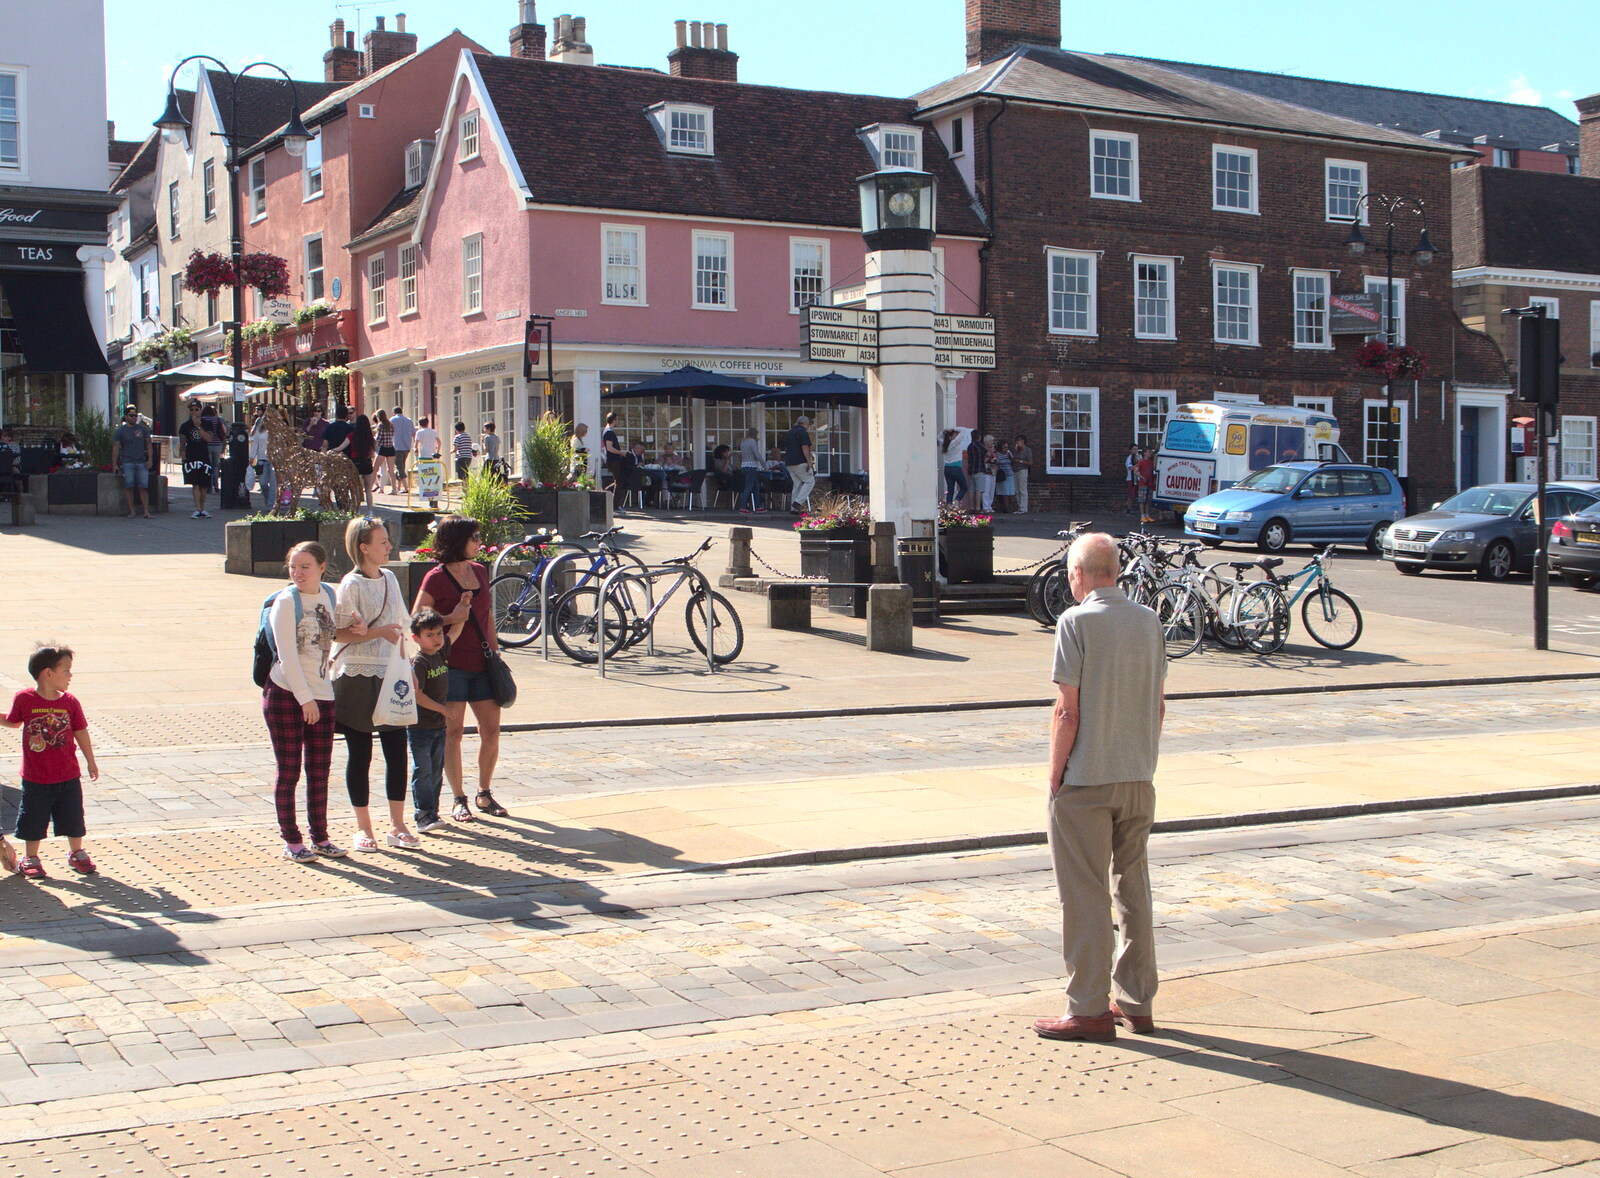 Grandad waits to cross the road from The BBs at Bacton, and Abbey Gardens, Bury St. Edmunds, Suffolk - 19th July 2015